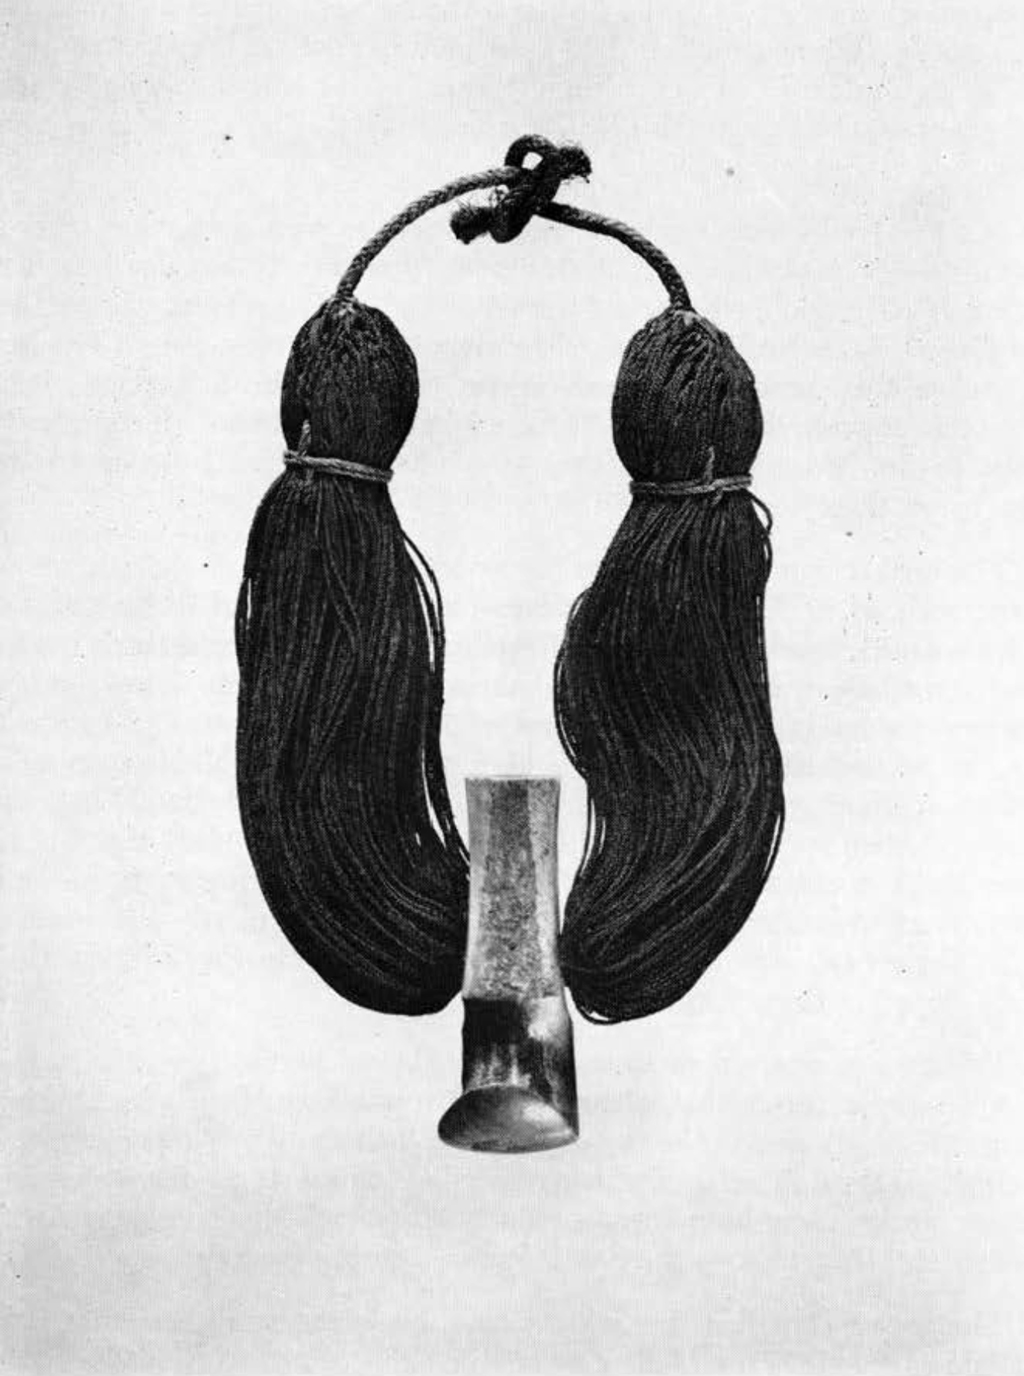 A necklace made of small braids of hair, with a large hook in the middle.